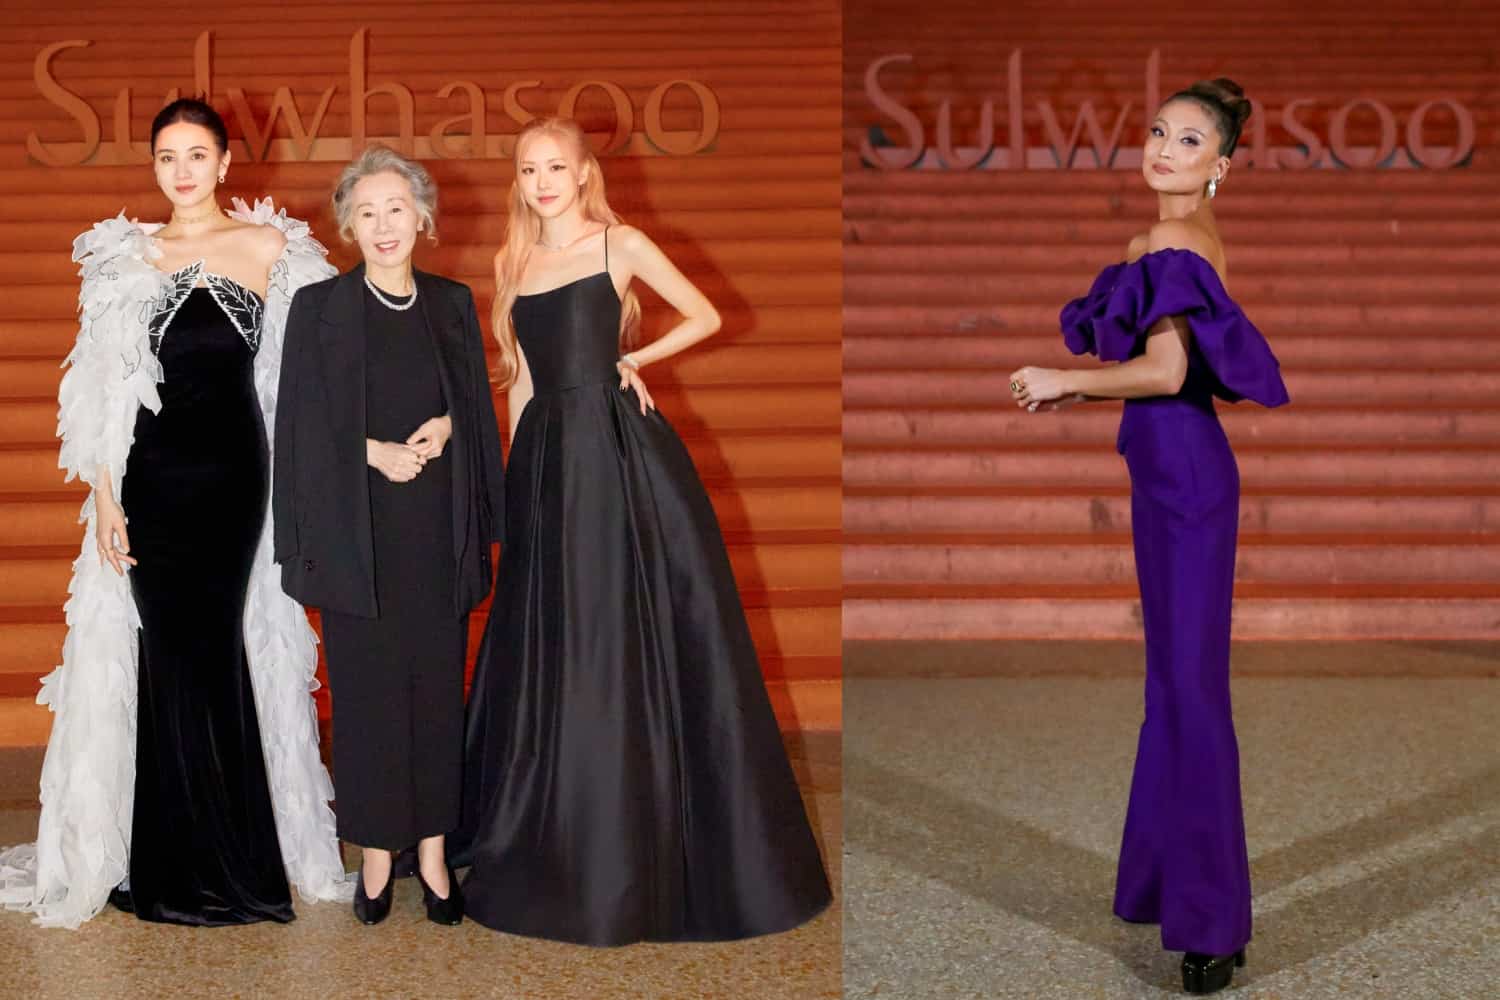 The Met Rolled Out The Orange Carpet To Welcome Sulwhasoo To NYC